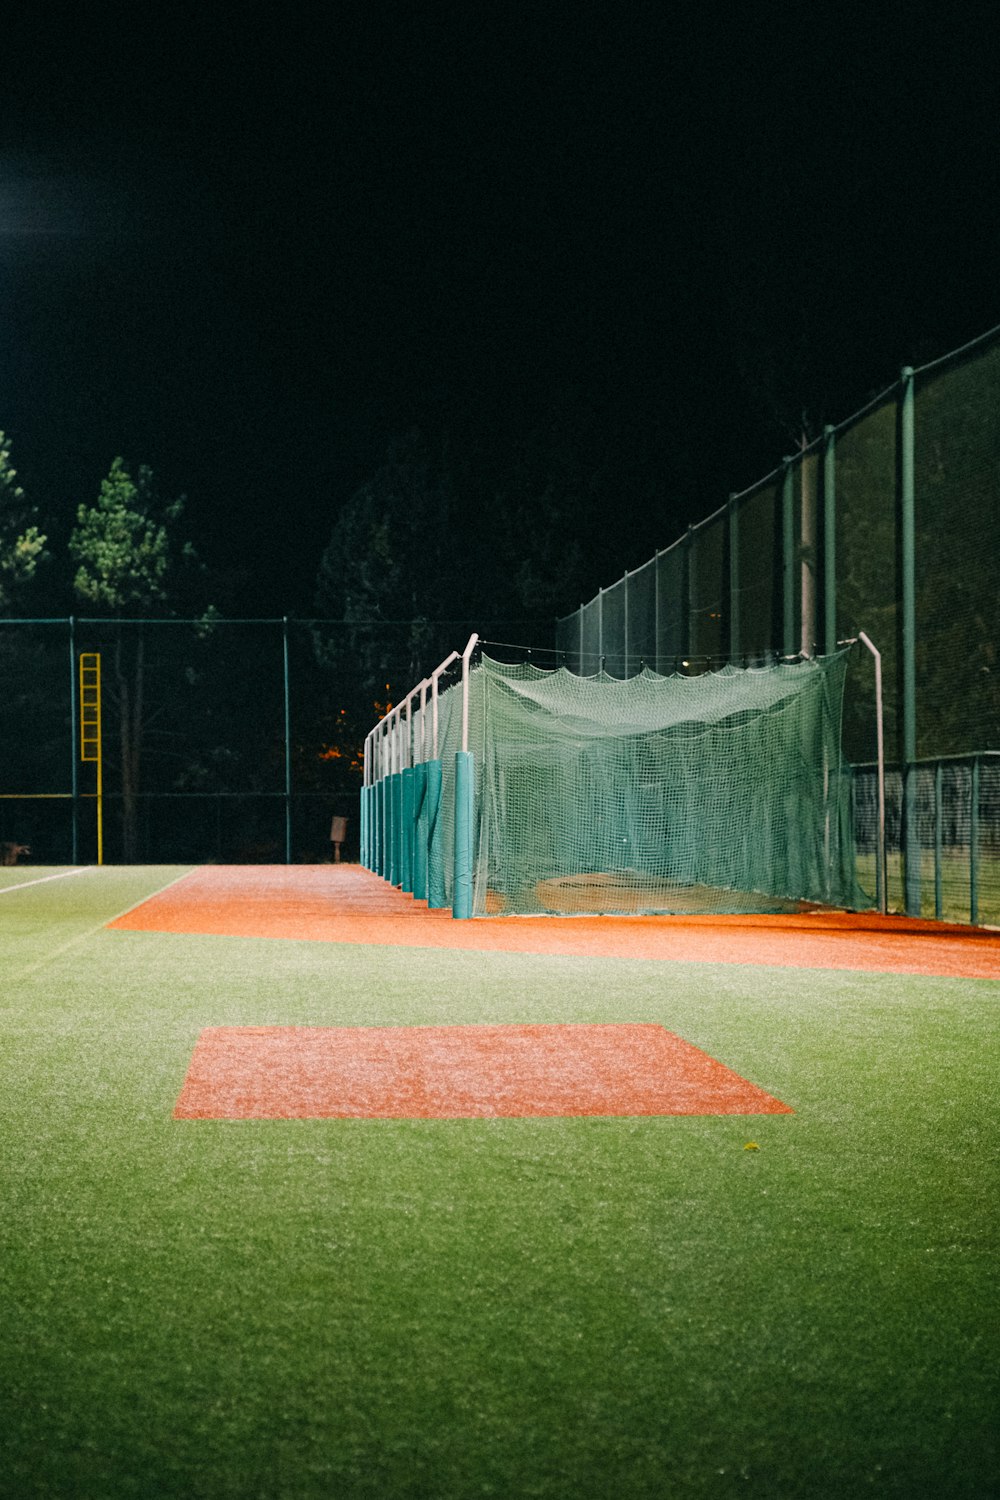 a baseball field at night with a batting cage